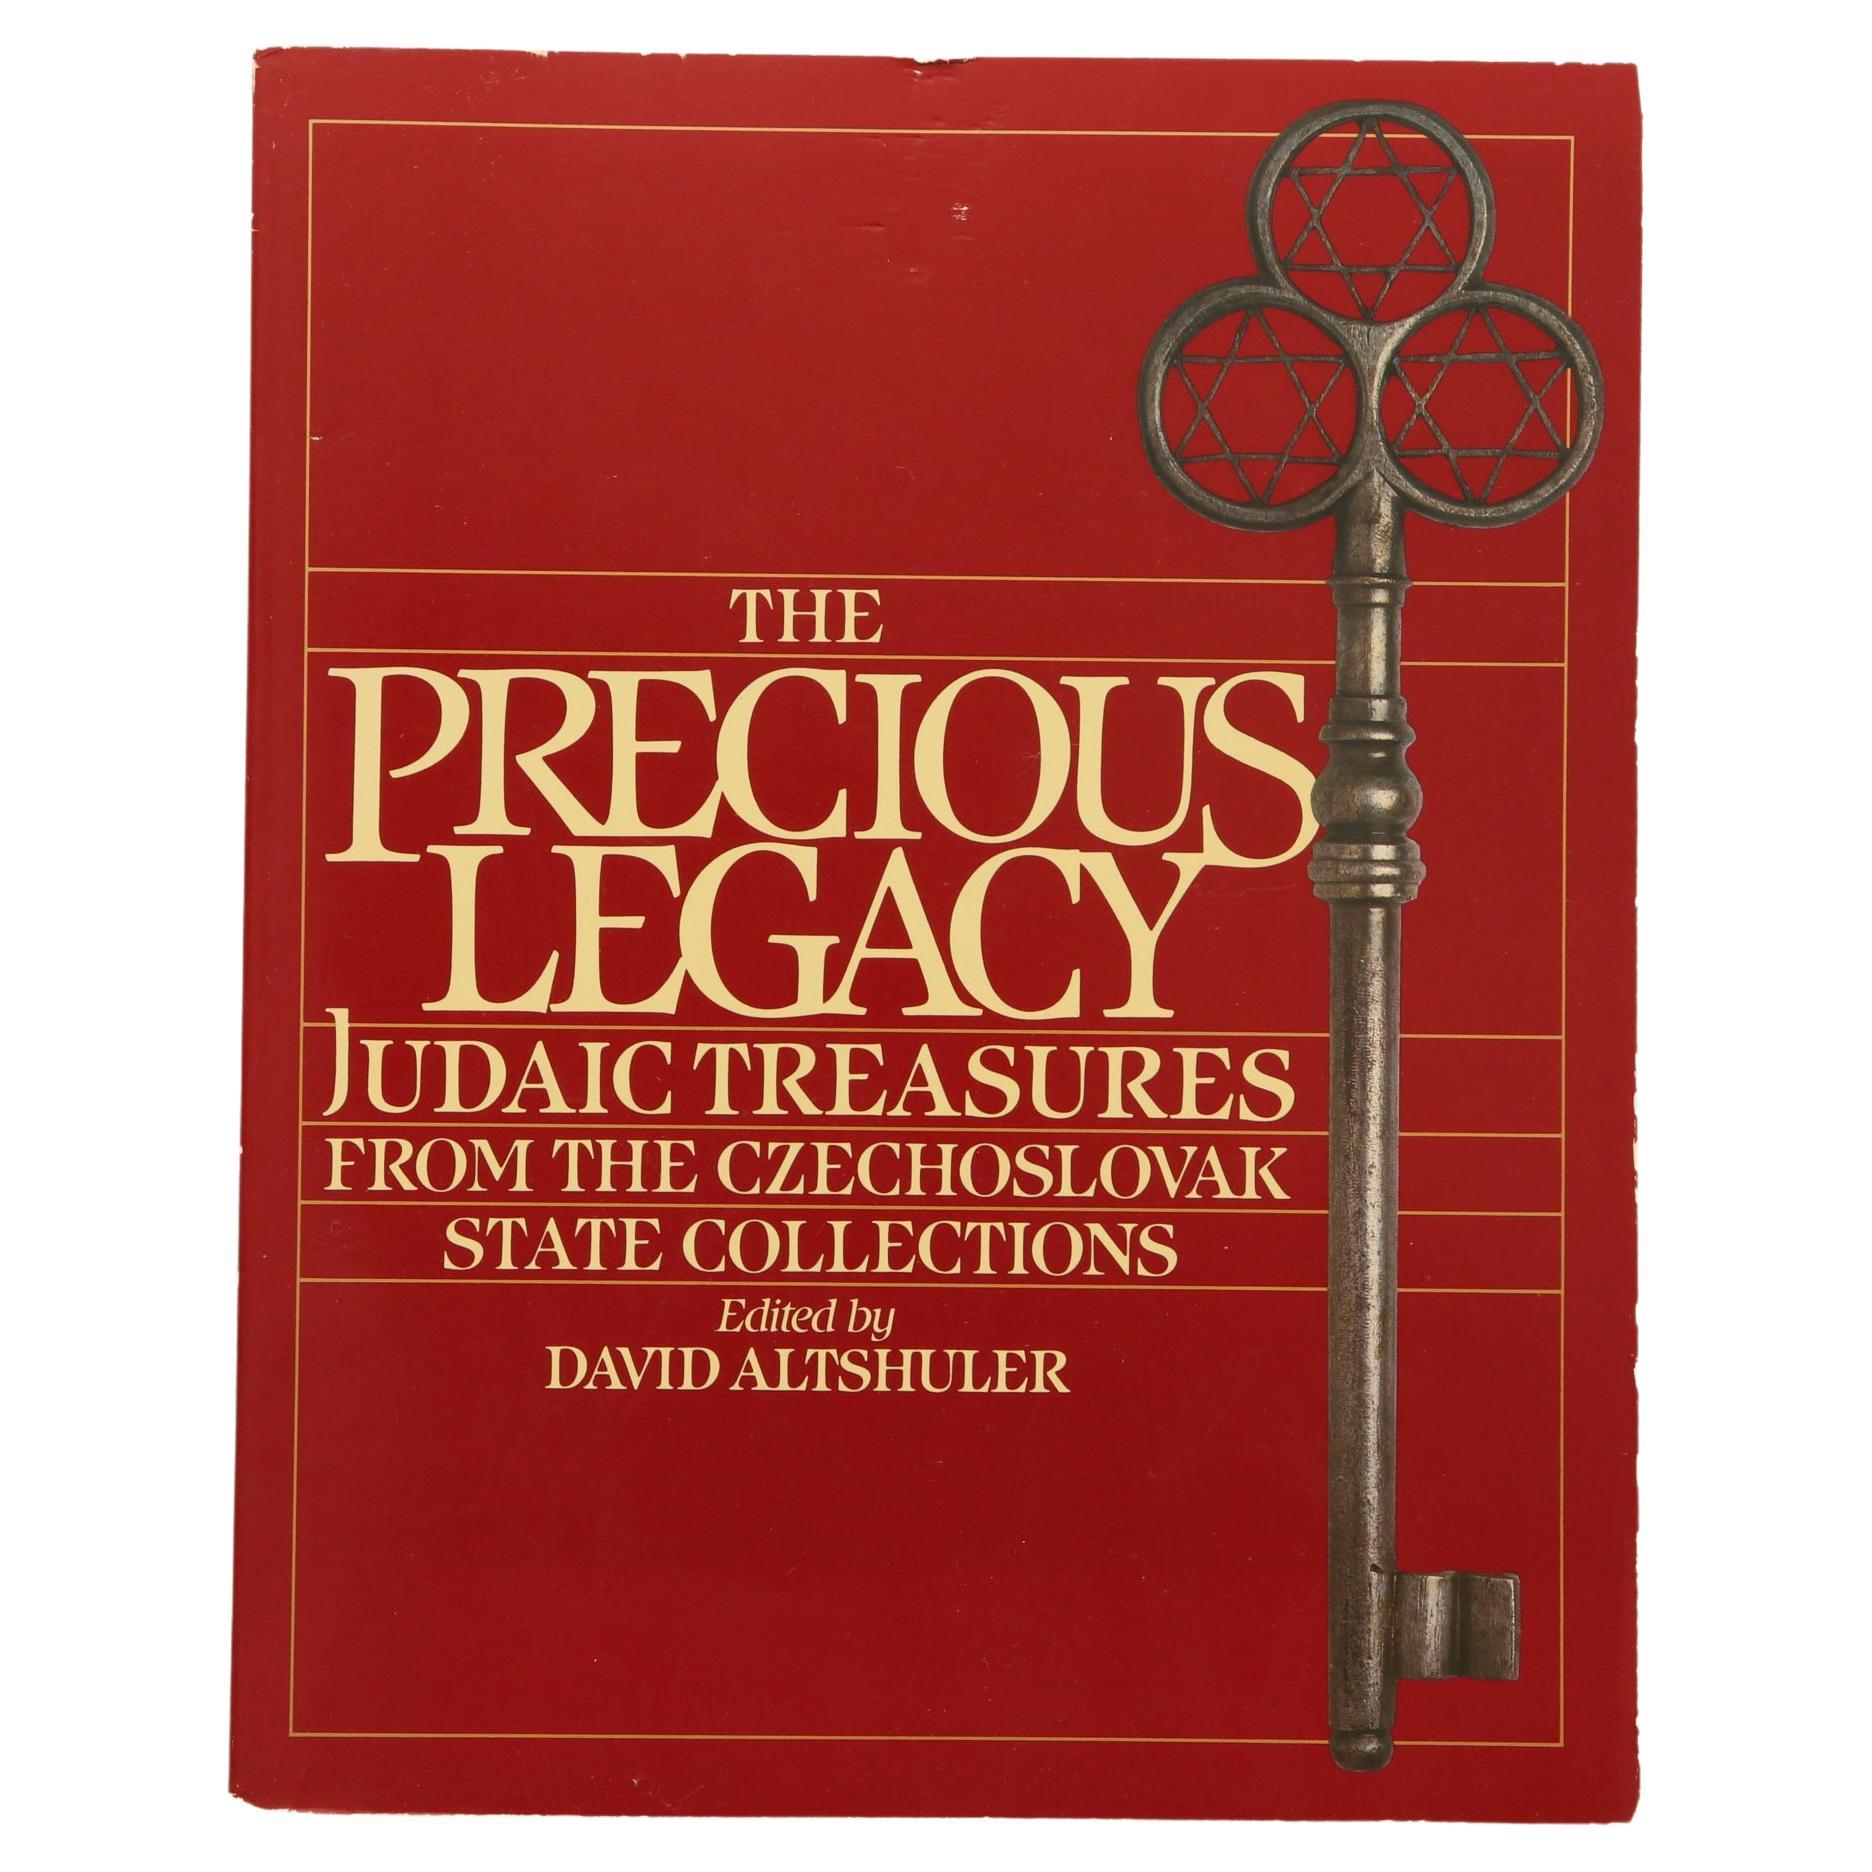 The Precious Legacy, Judaic Treasures From the Czechoslovak State Collections